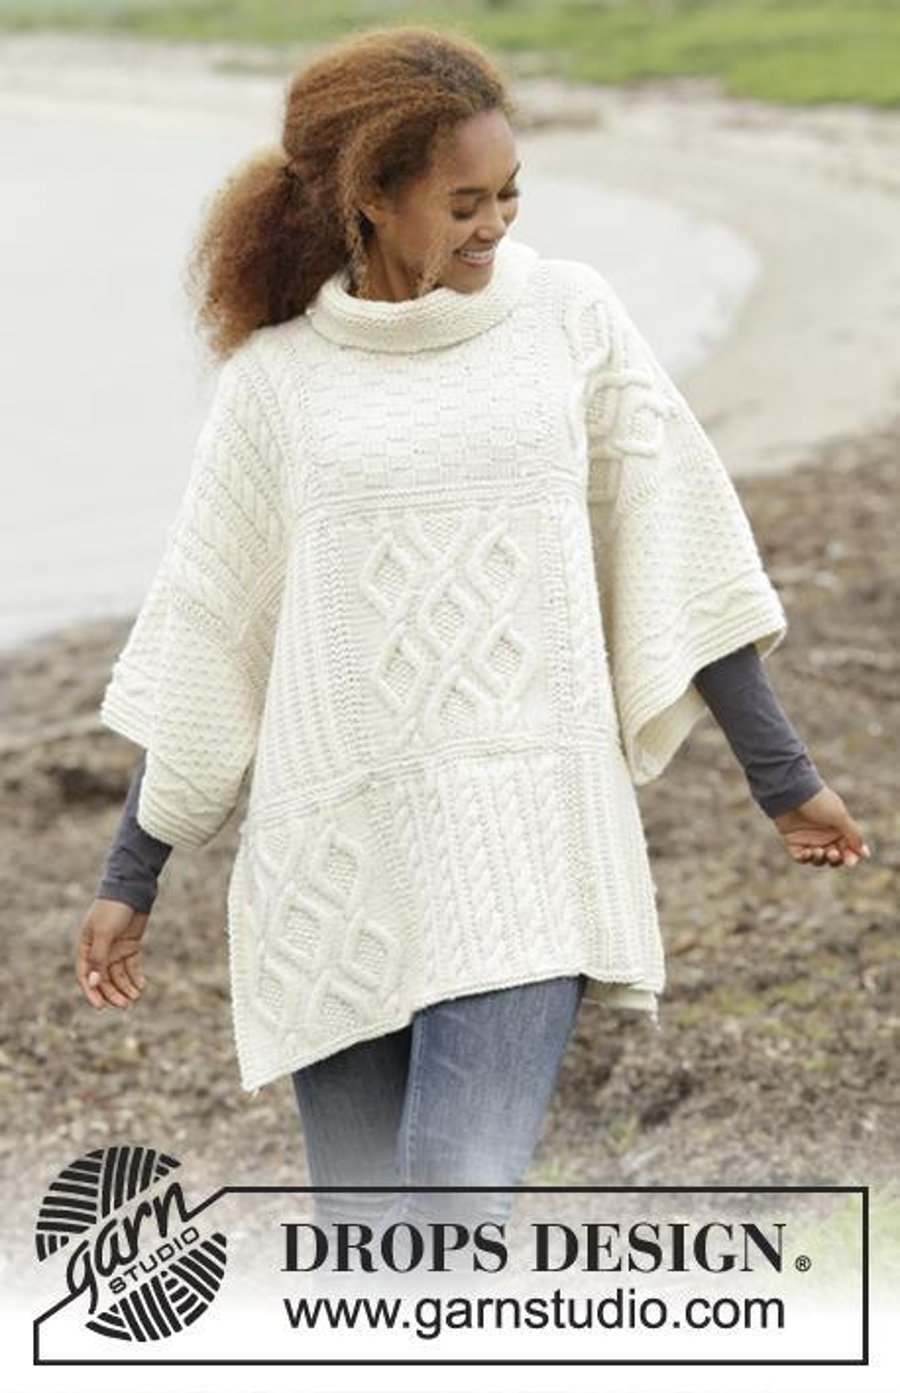 Hand knitted ladies poncho - Aran knits - chunky knit - knitted ladies clothes 